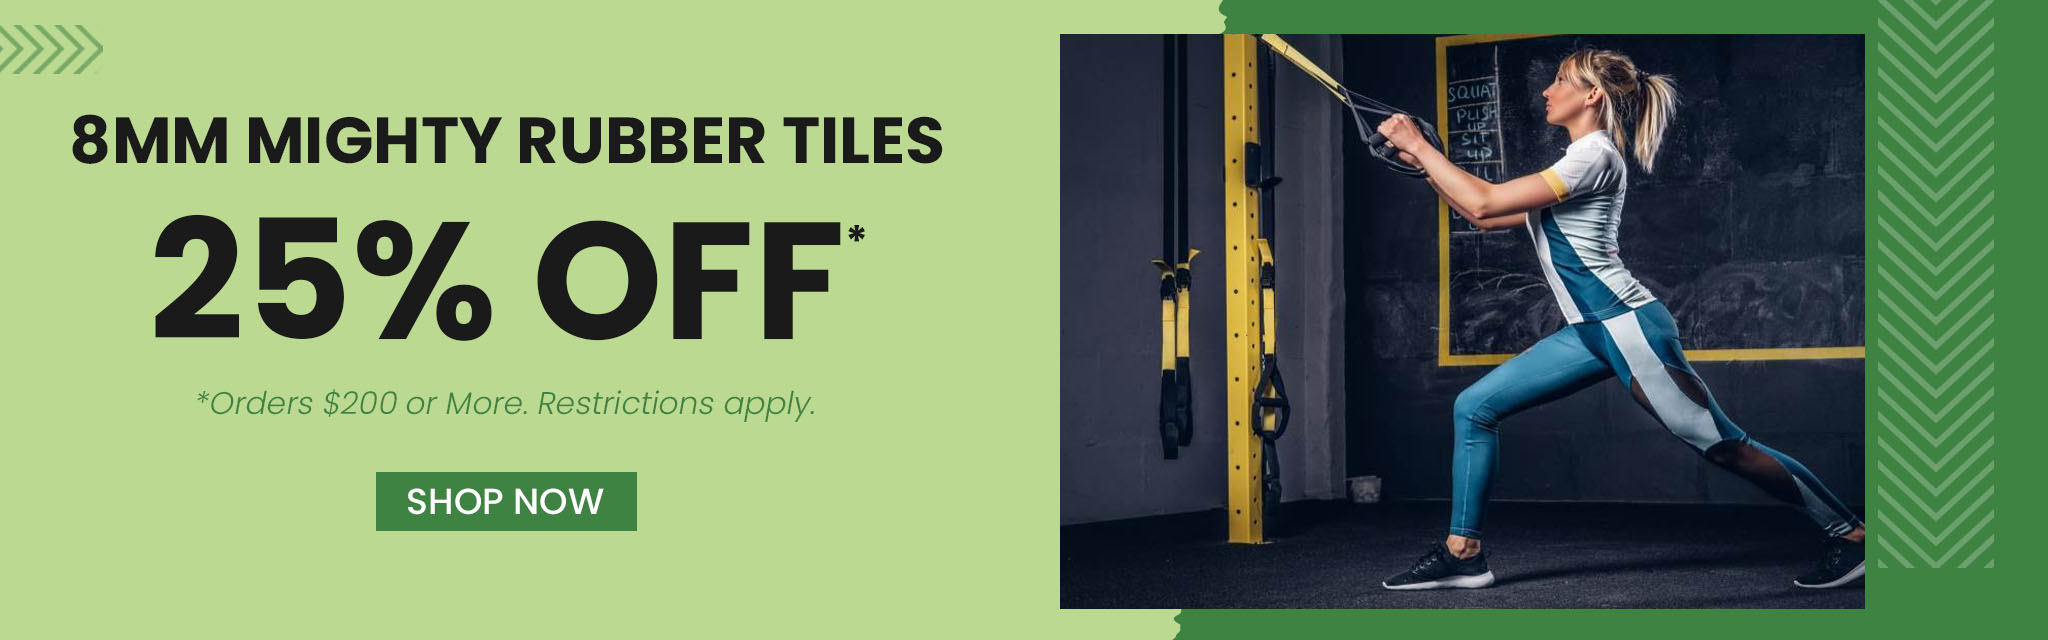 8mm Mighty Rubber Tiles. 25% Off. Shop Now Order $200 or More. Restrictions apply.